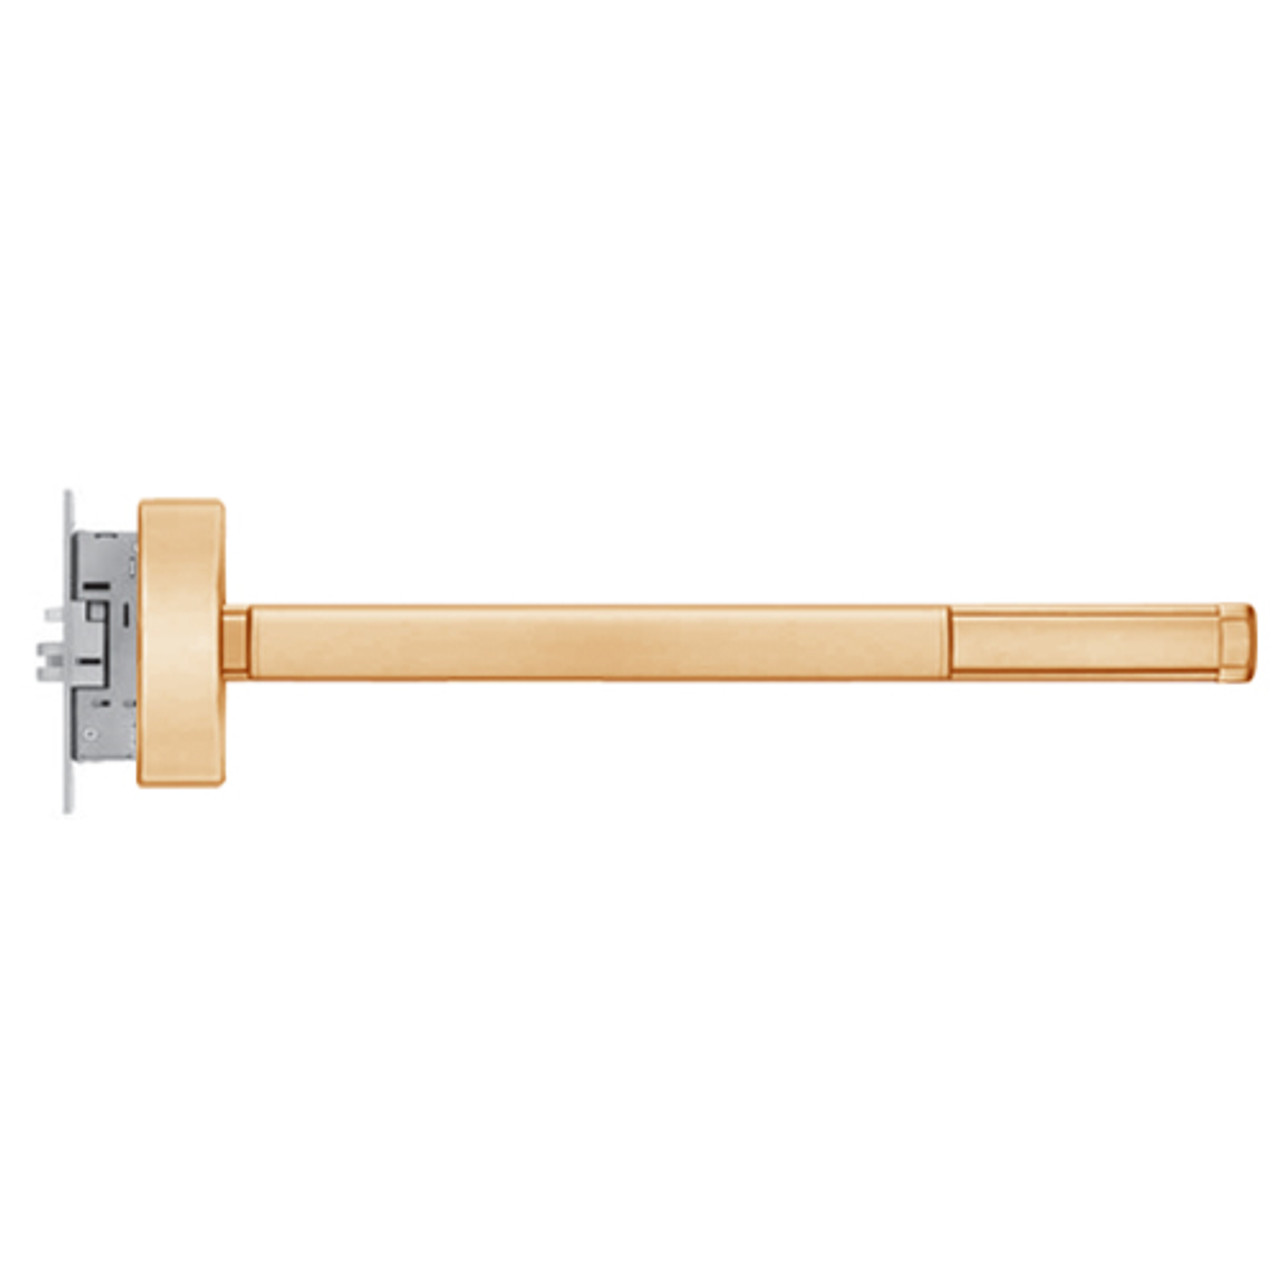 TS2305-LHR-612-48 PHI 2300 Series Apex Mortise Exit Device with Touchbar Monitoring Switch Prepped for Key Controls Thumb Piece in Satin Bronze Finish